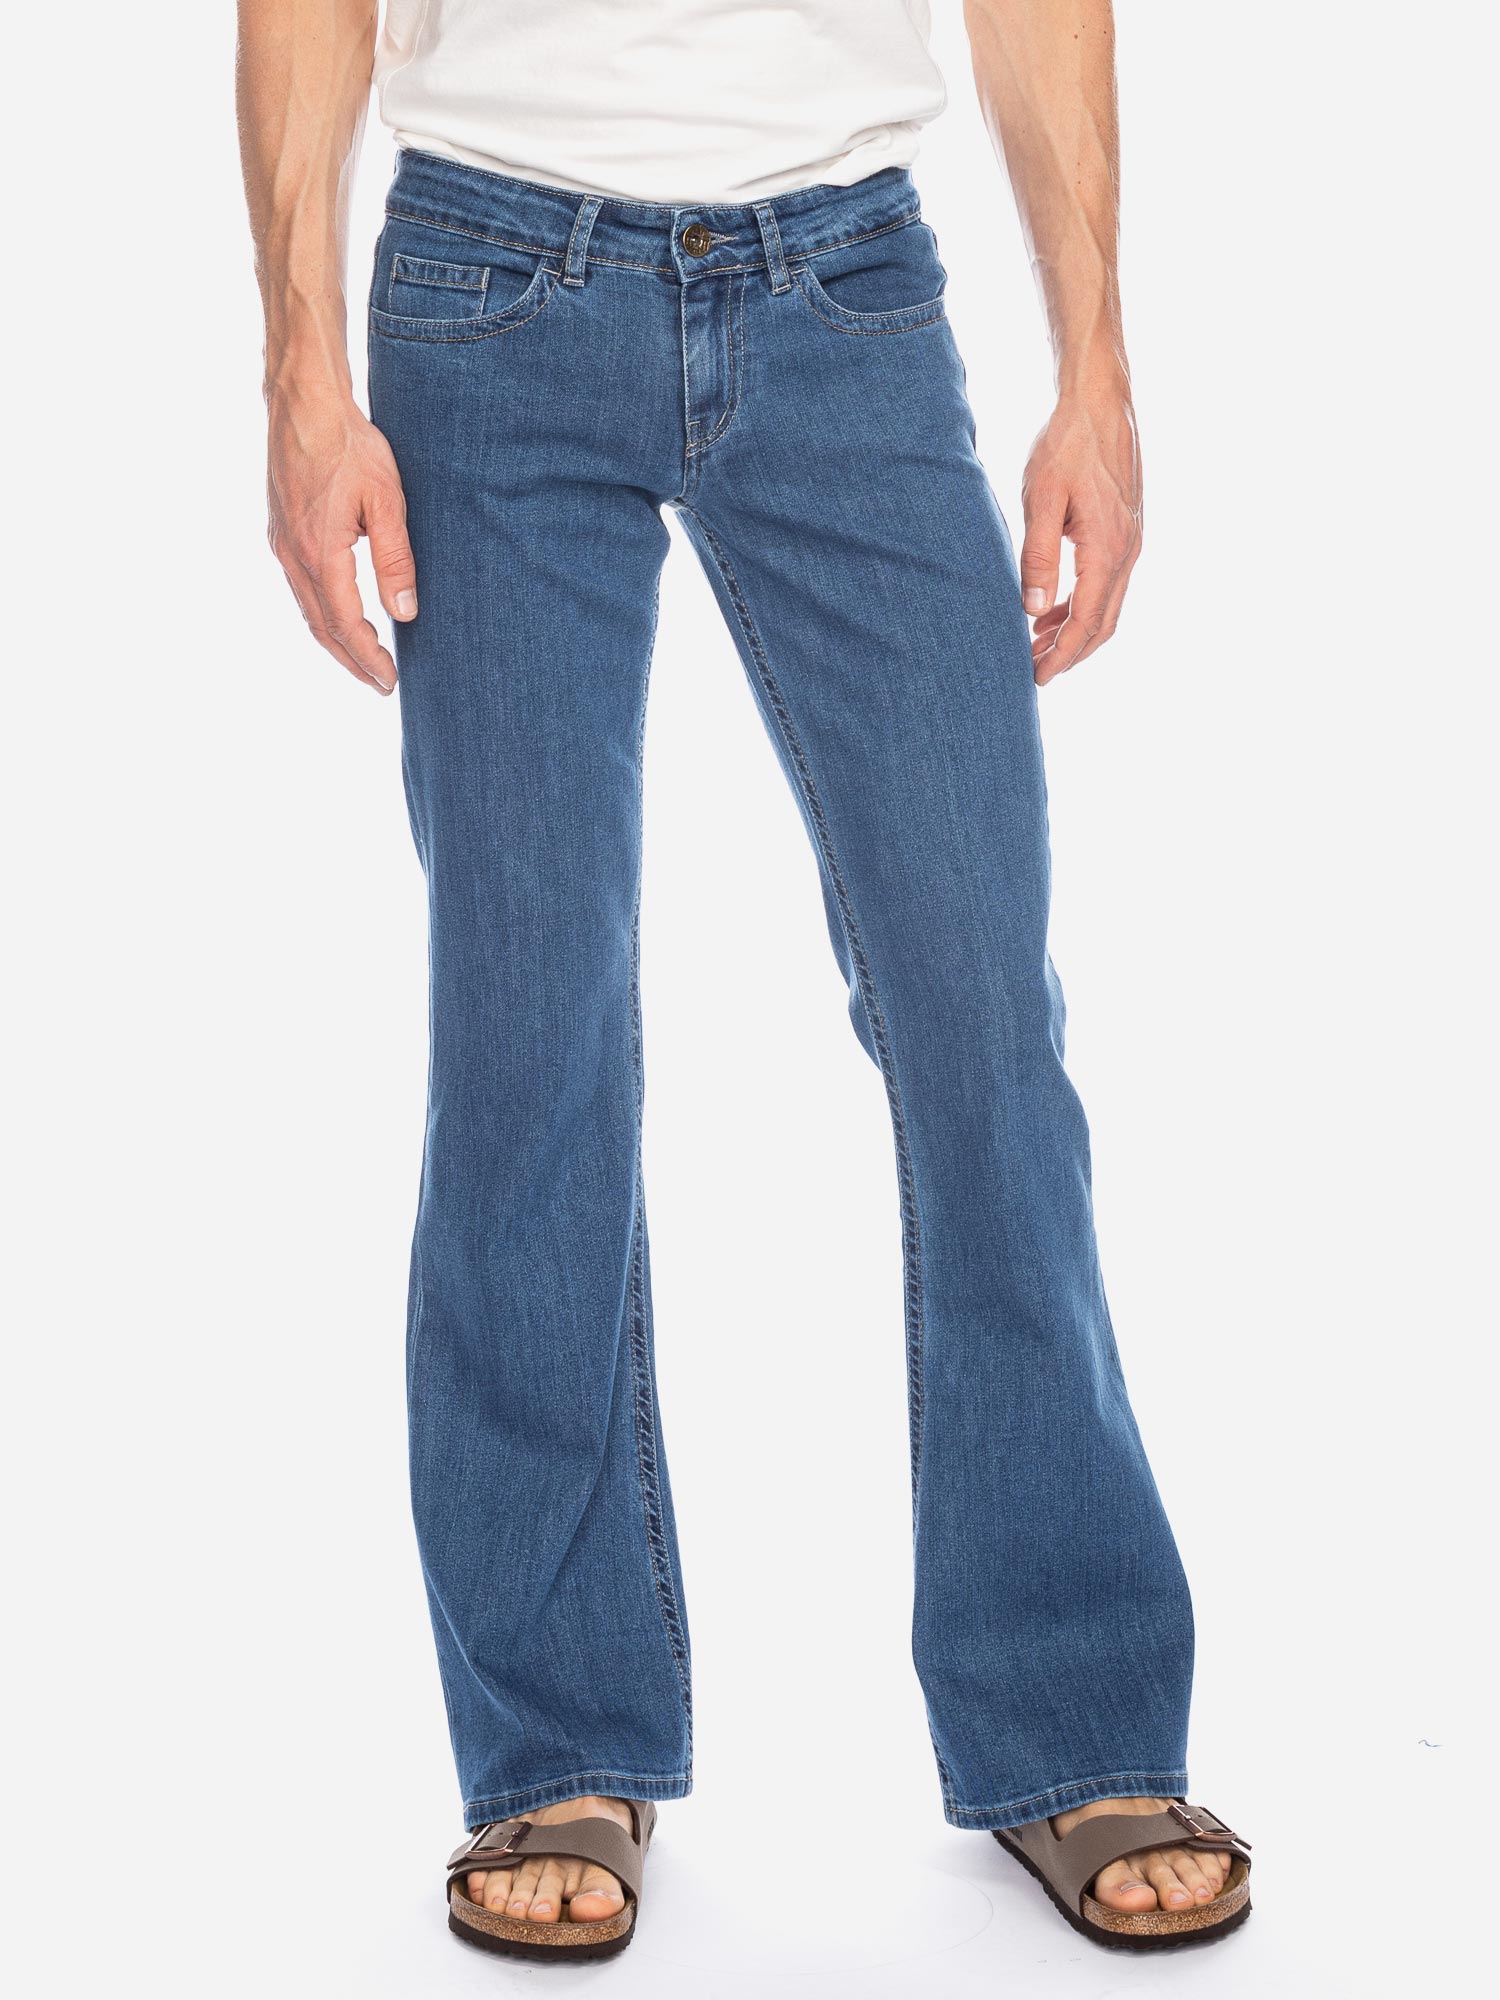 Jeans Fred GOTS RR2776 BL